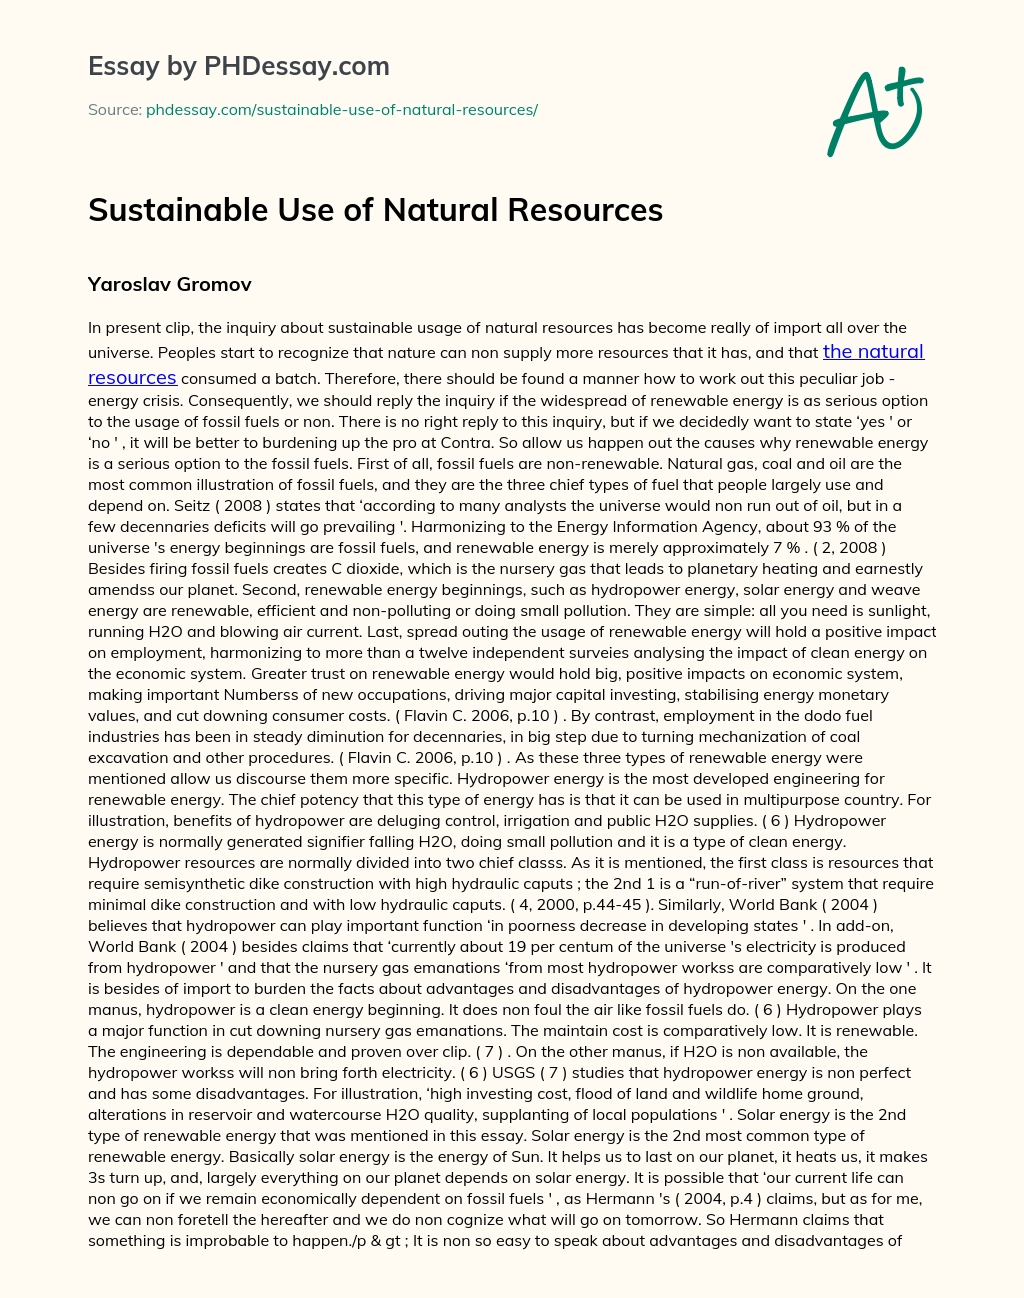 essay on sustainability of natural resources